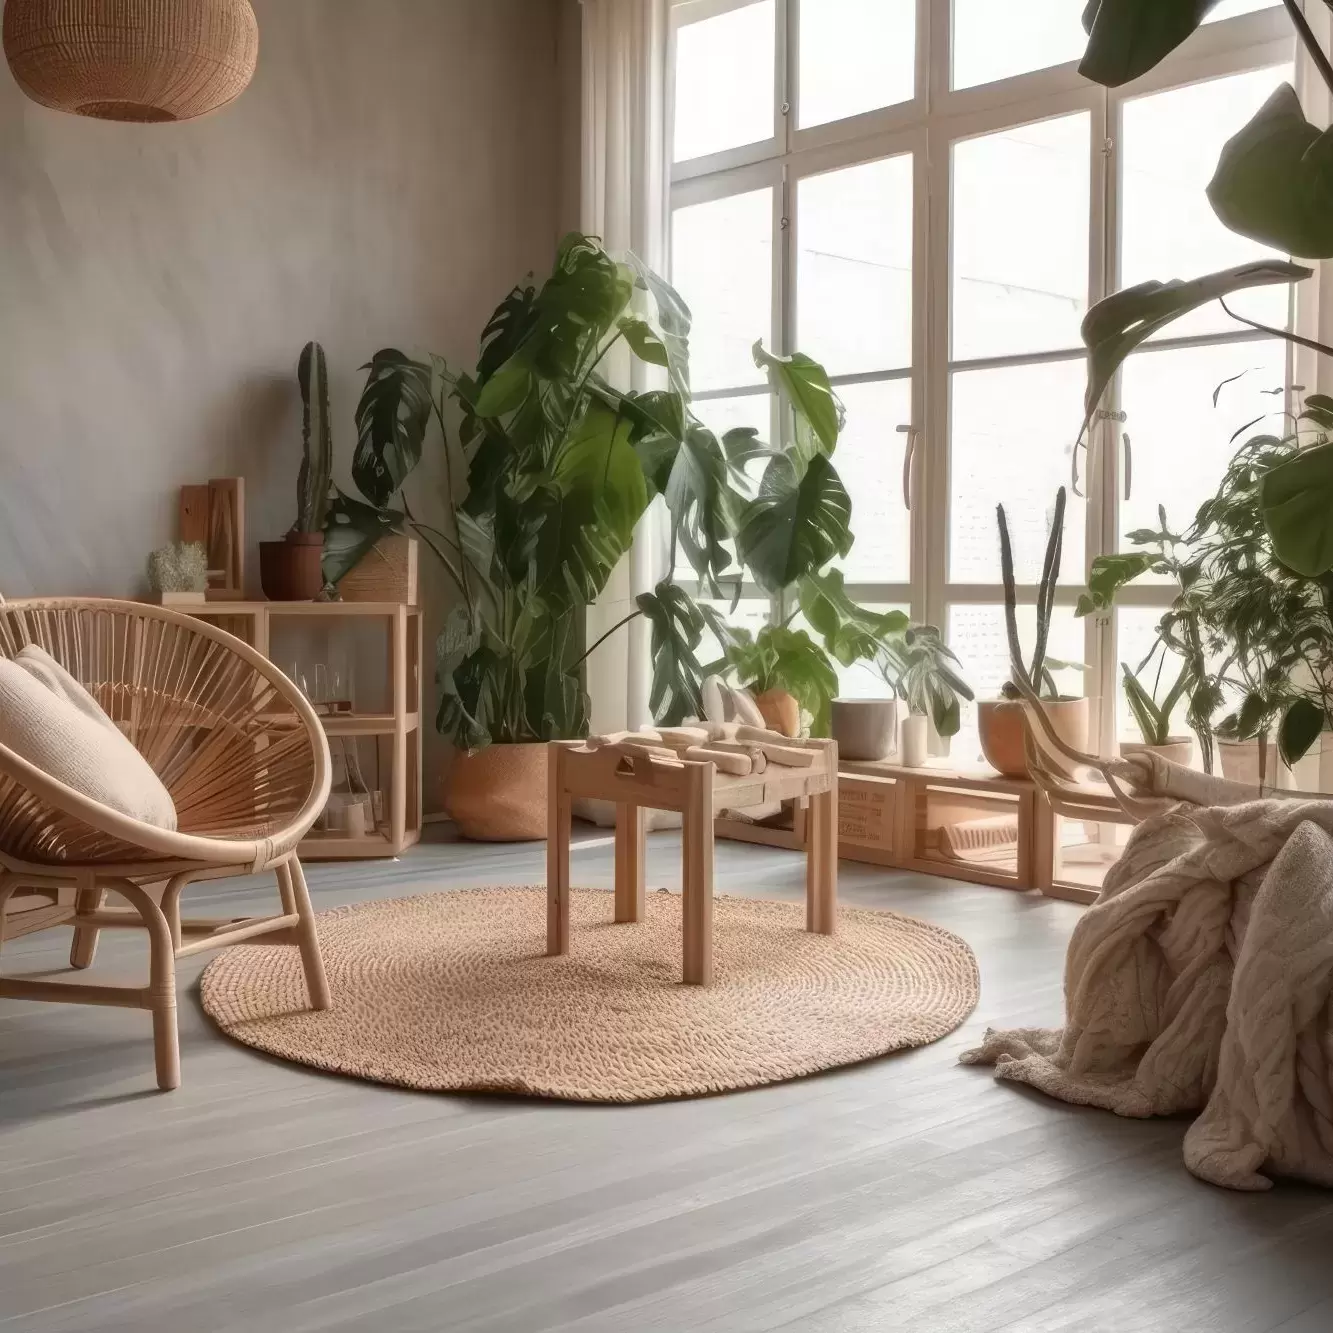 An apartment decorated with cute furniture and many plants.